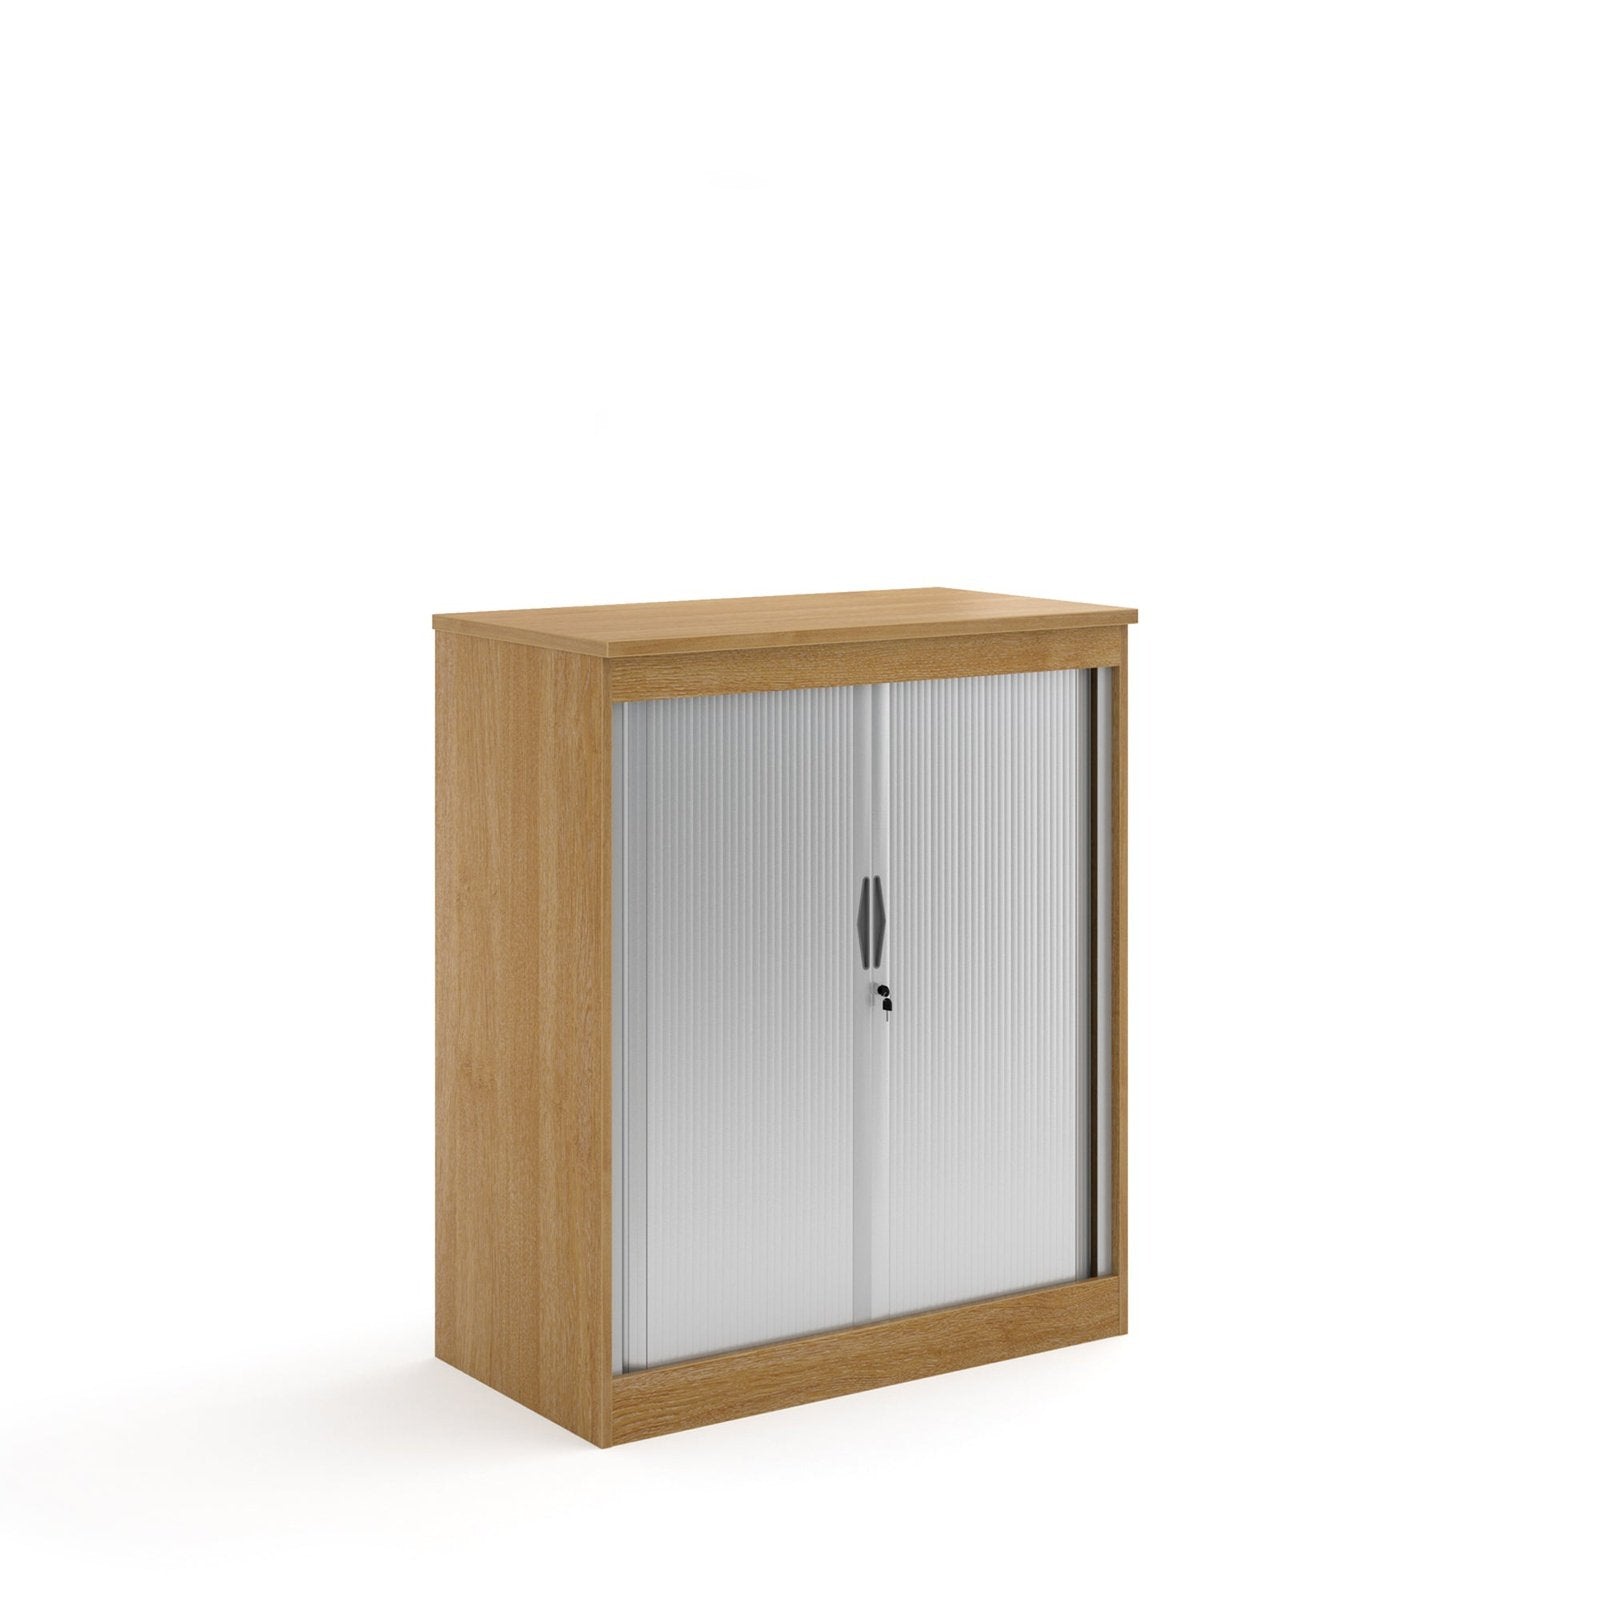 Systems horizontal tambour door cupboard - Office Products Online